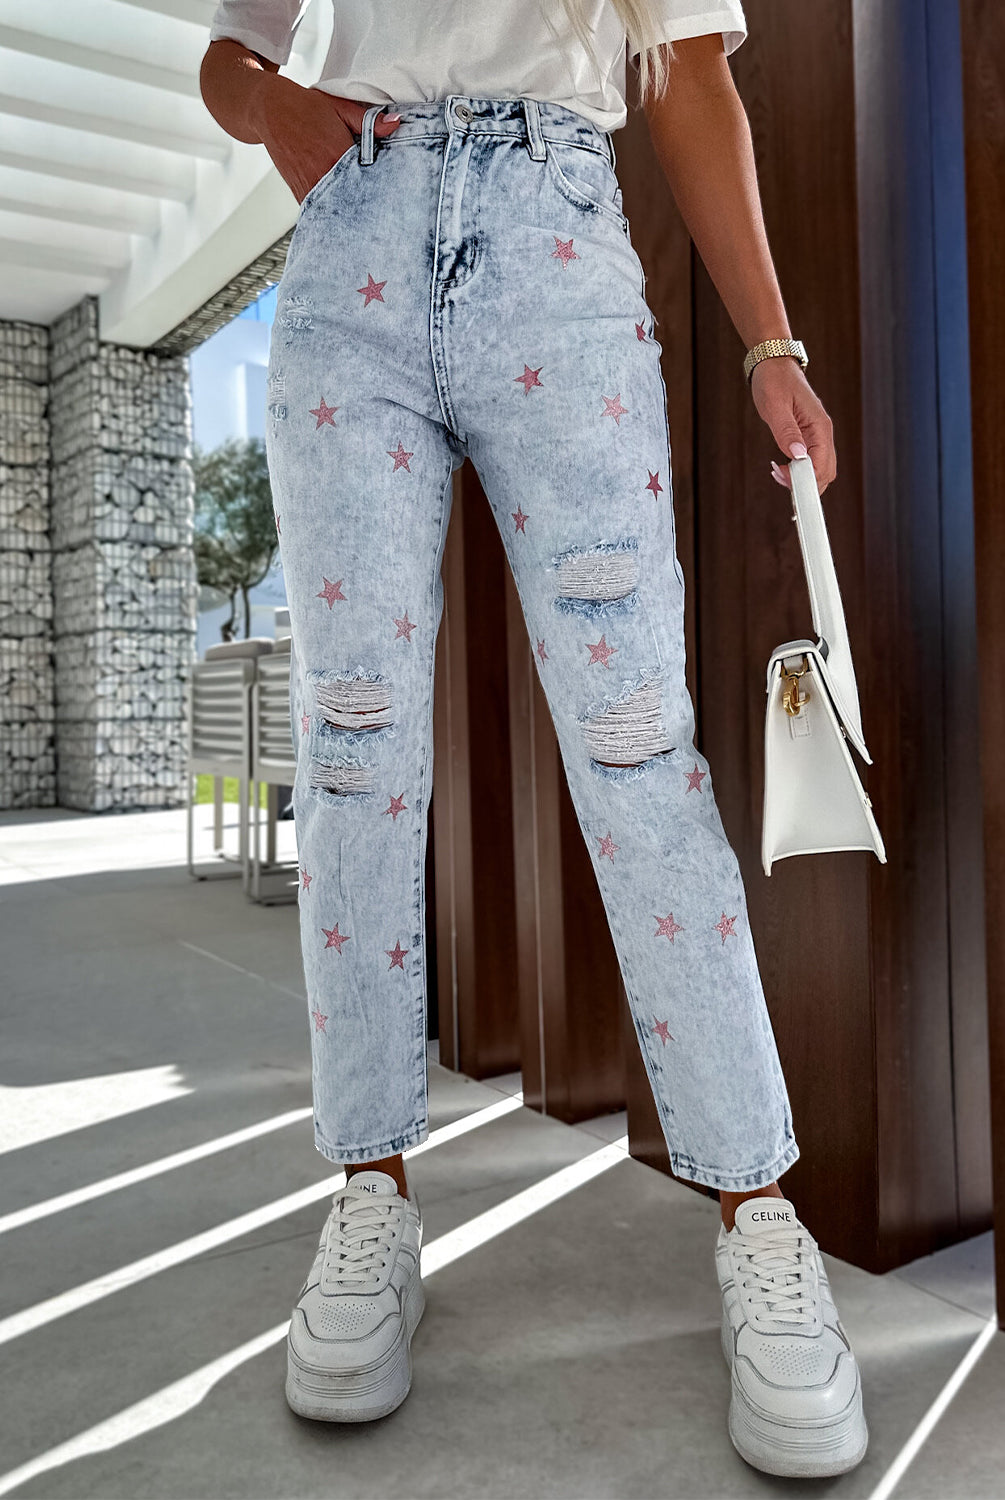 Fashion-forward woman sporting distressed light-wash high-waist jeans with a unique red star pattern, paired with classic white sneakers for a chic, street-style look.